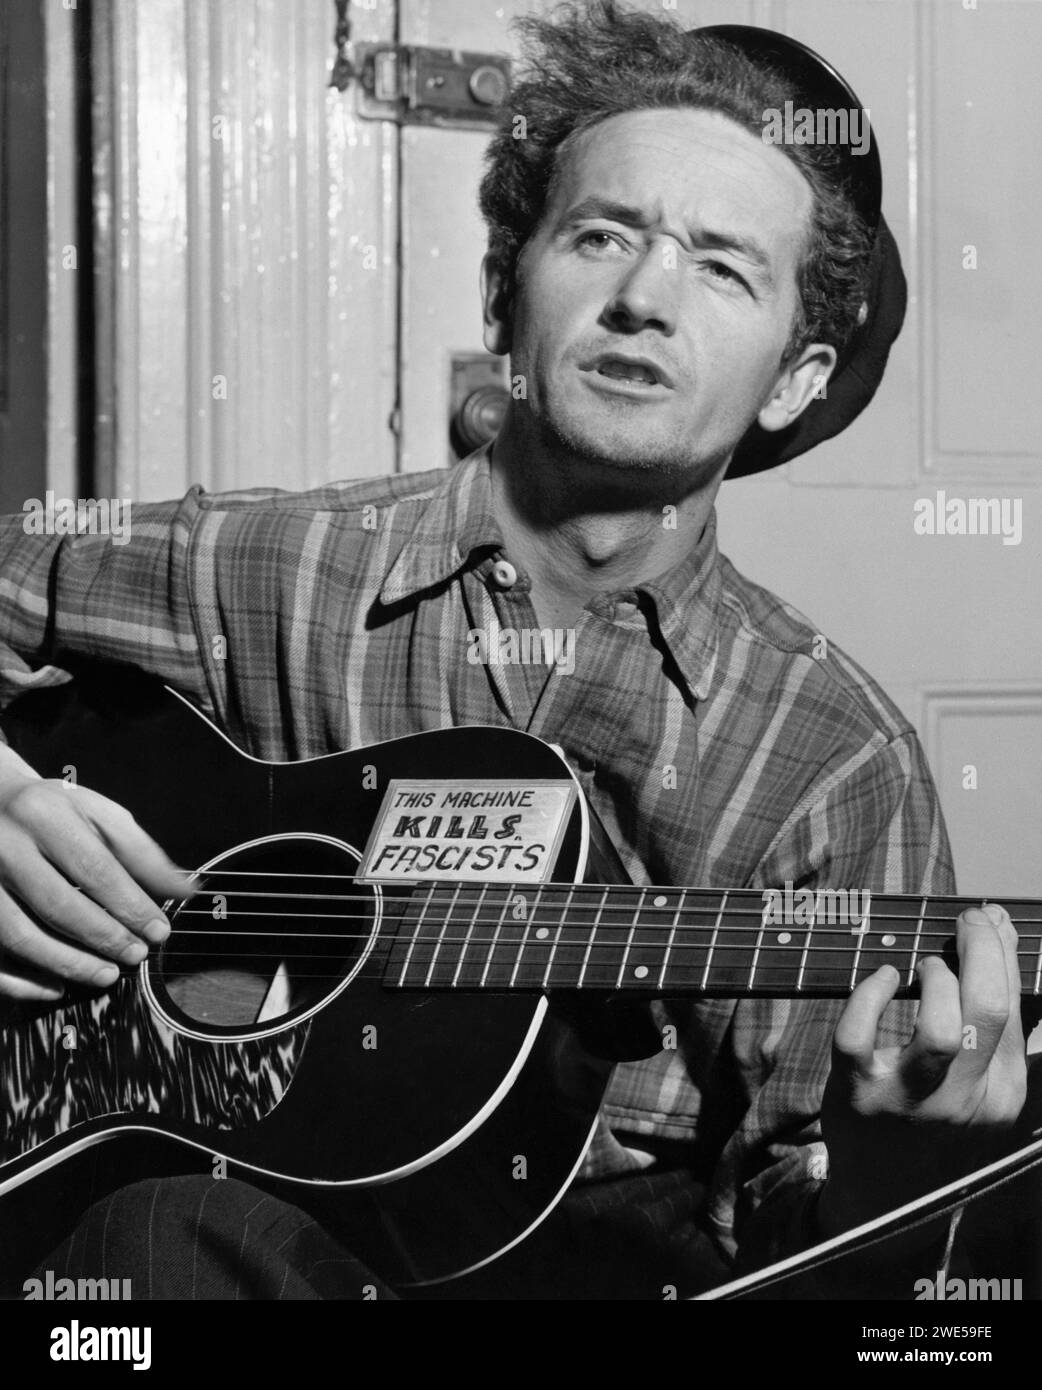 Woody Guthrie (1912-1967), American folk musician from Oklahoma whose work focused on themes of American socialism and anti-fascism. Guthrie is perhaps best known for the song "This Land is Your Land". Stock Photo